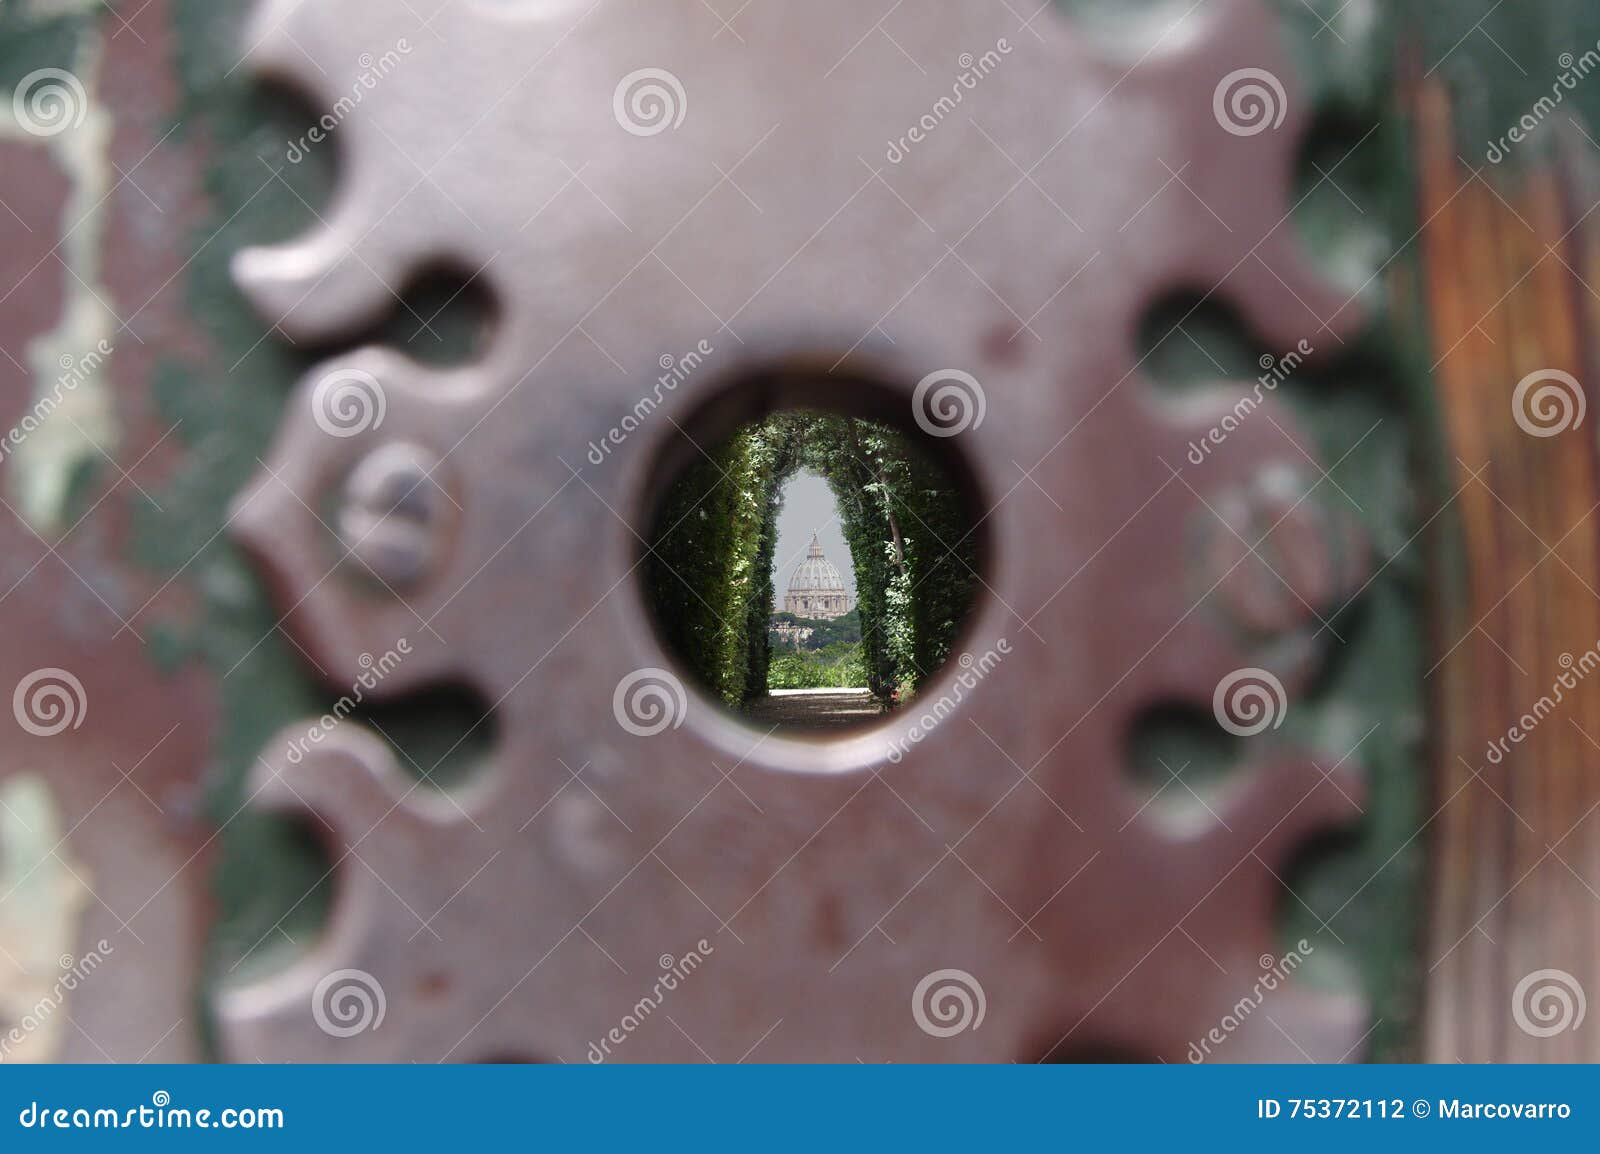 aventine keyhole in rome